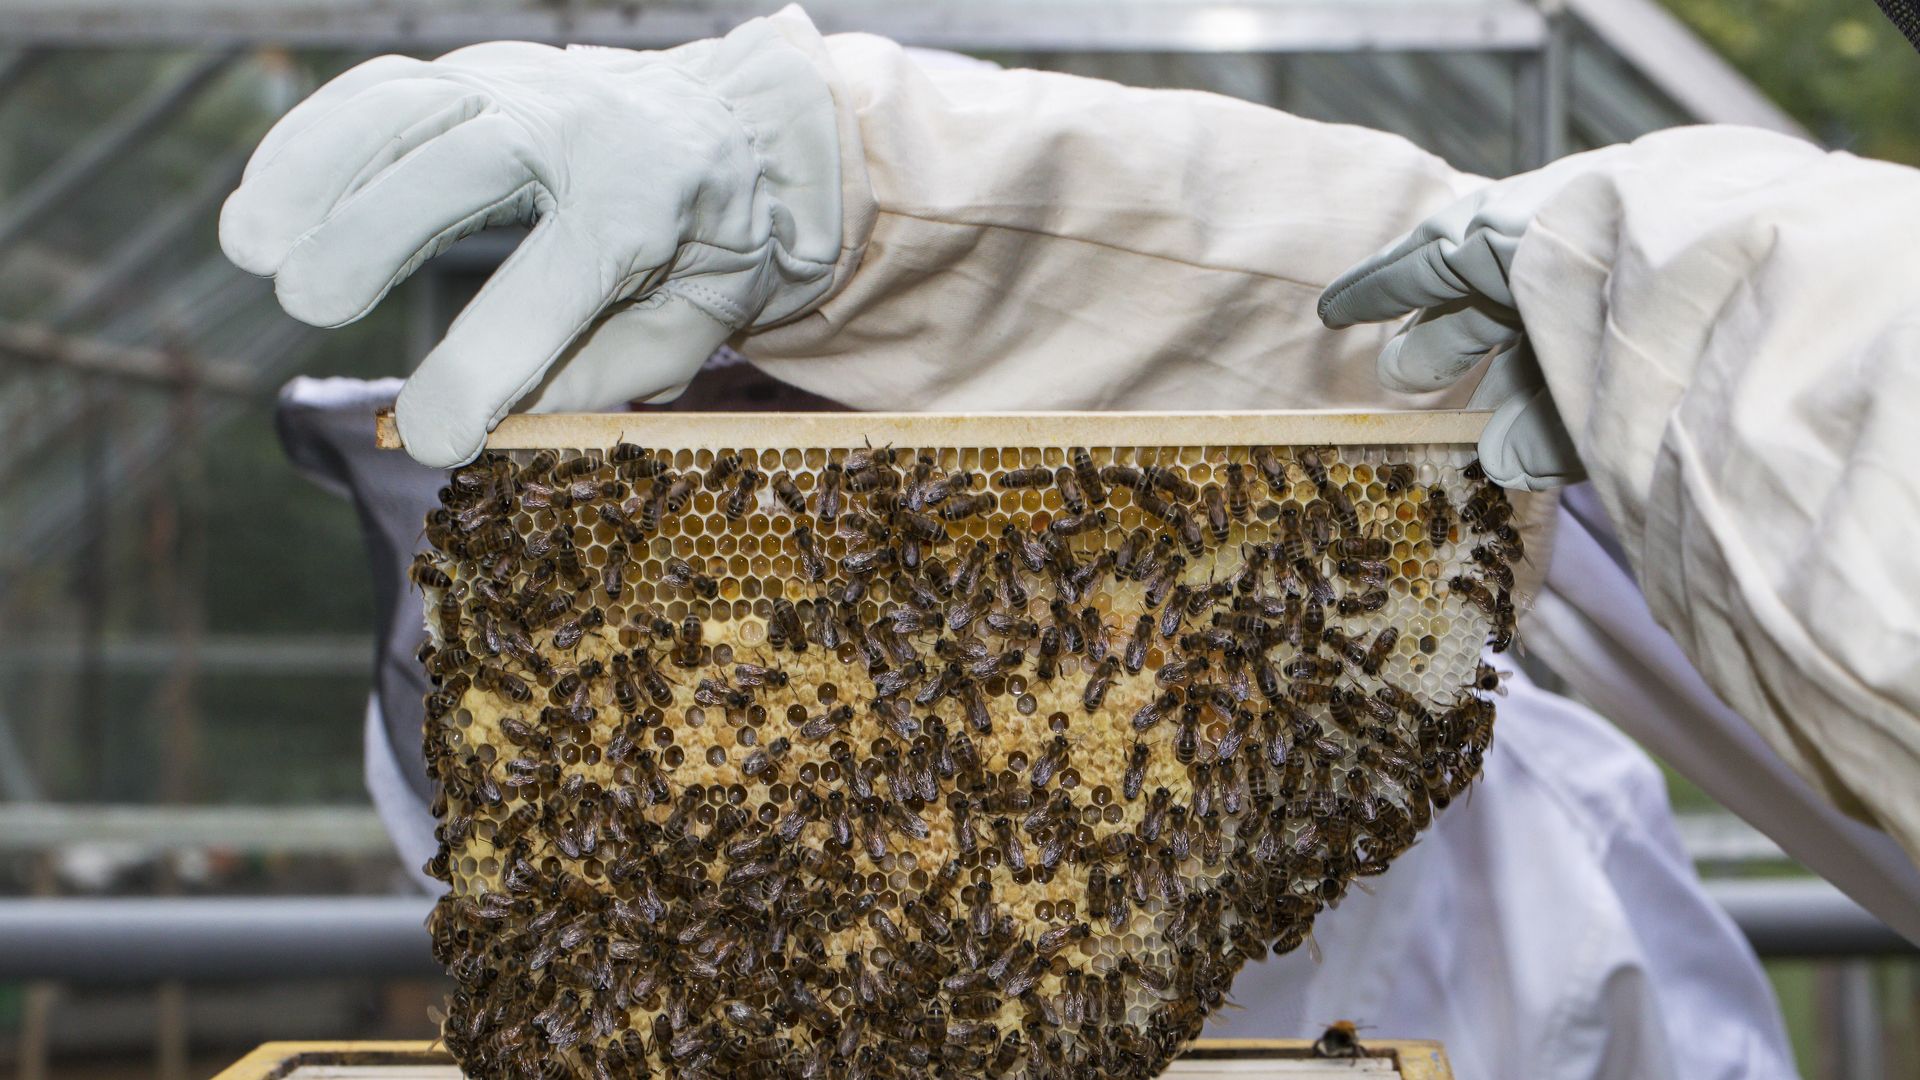 In this image, two gloved hands take a honeycomb out of a man-made hive.